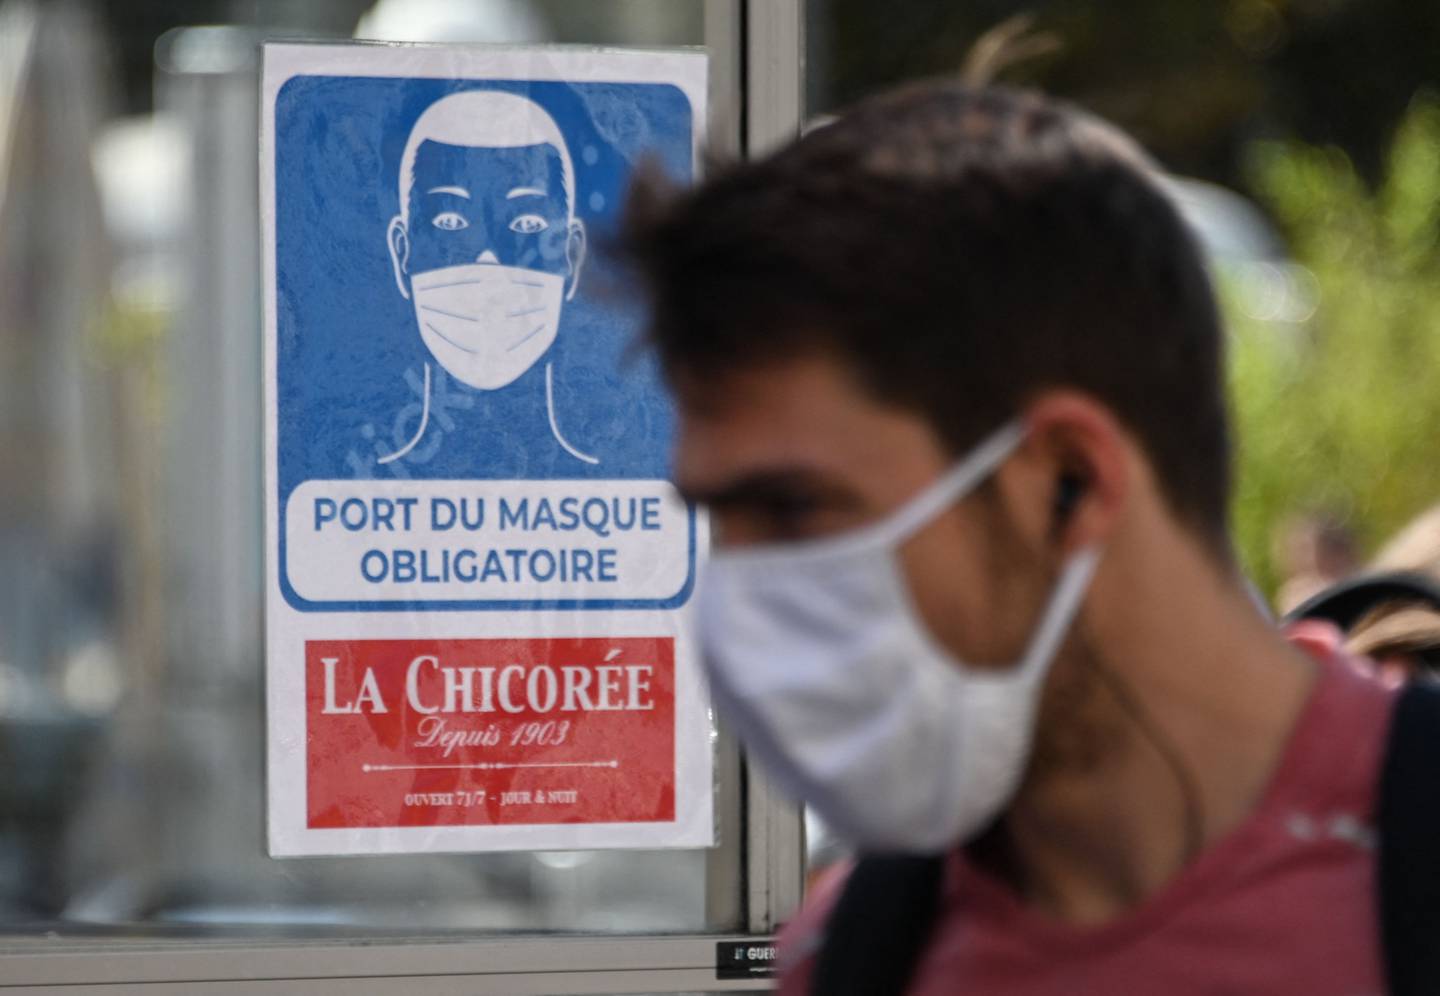 A pedestrian in Lille, France in 2020. From December 31, 2021, mask-wearing in France is mandatory again to prevent the spread of Covid-19. AFP